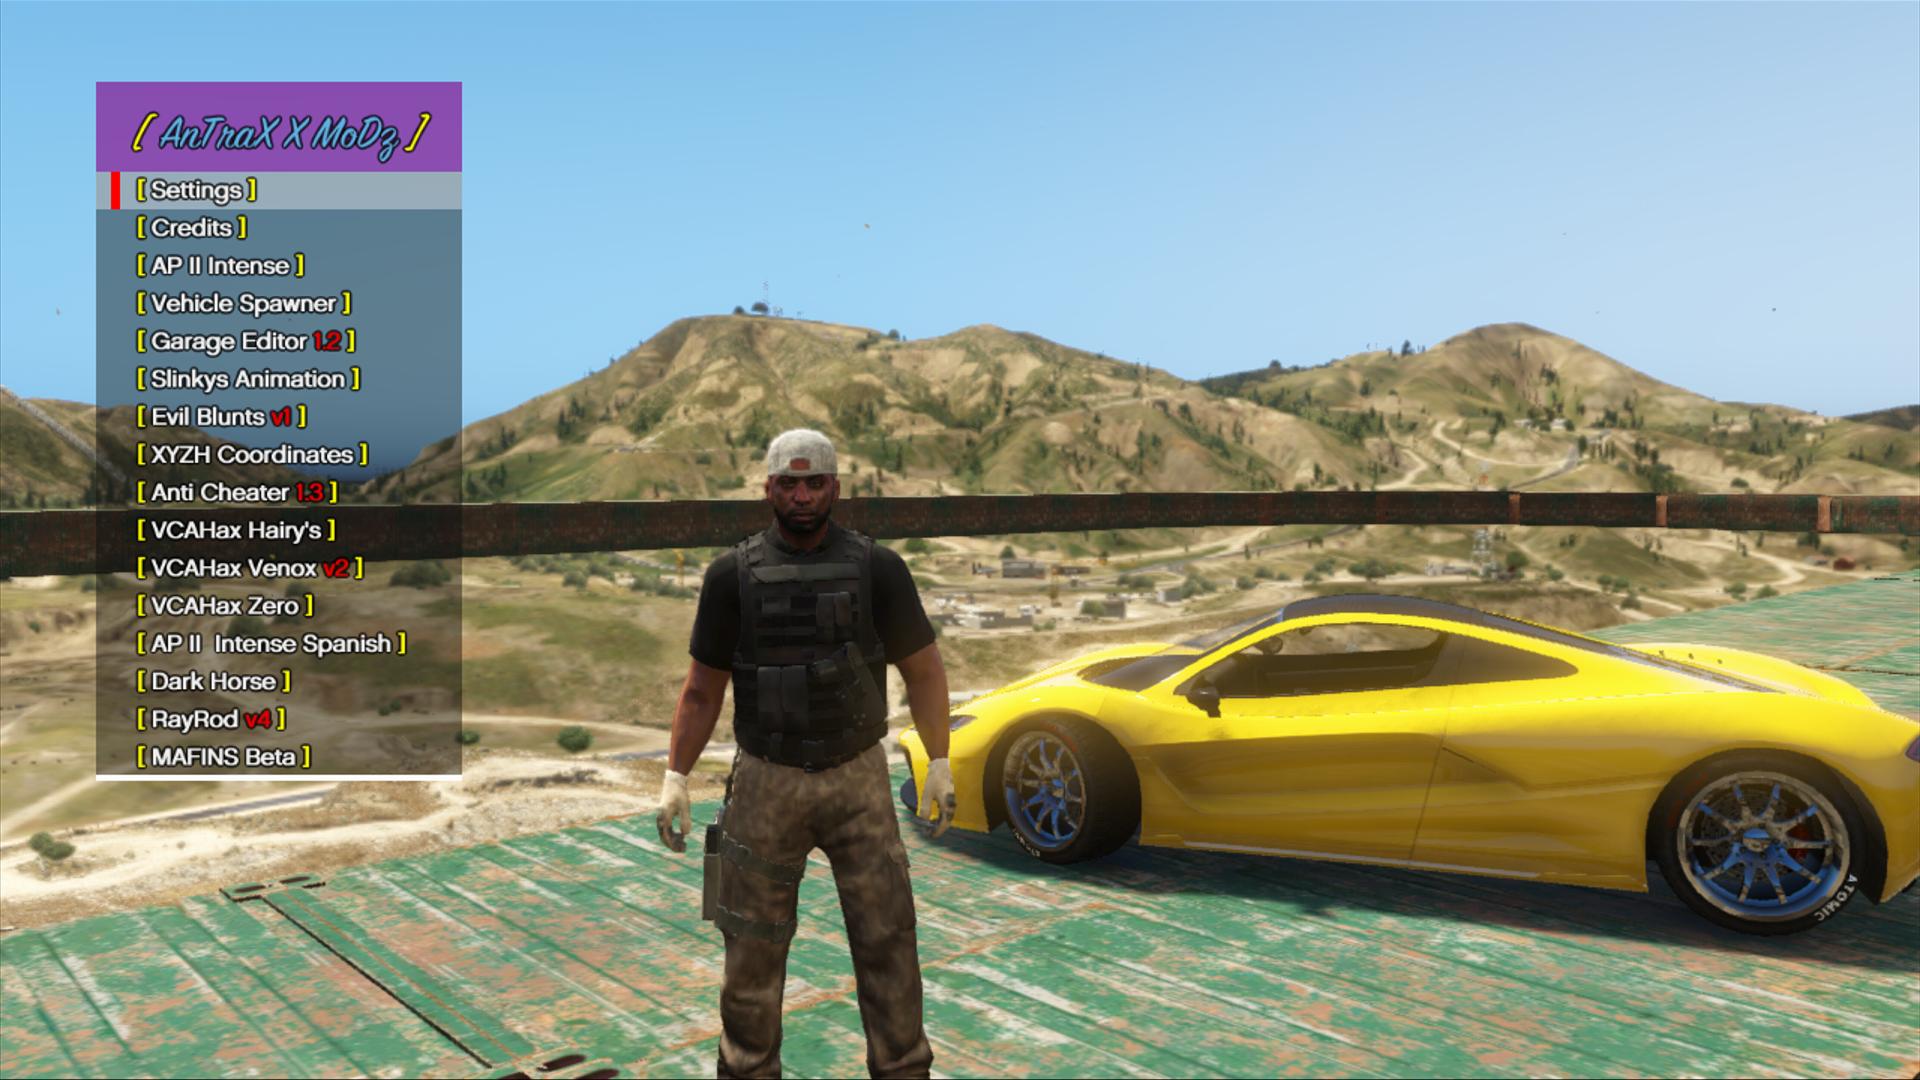 How To Mod GTA 5 on Xbox 360!  INFINITE MONEY & AMMO, MAX SKILLS AND MORE!  [NO JTAG/RGH] 